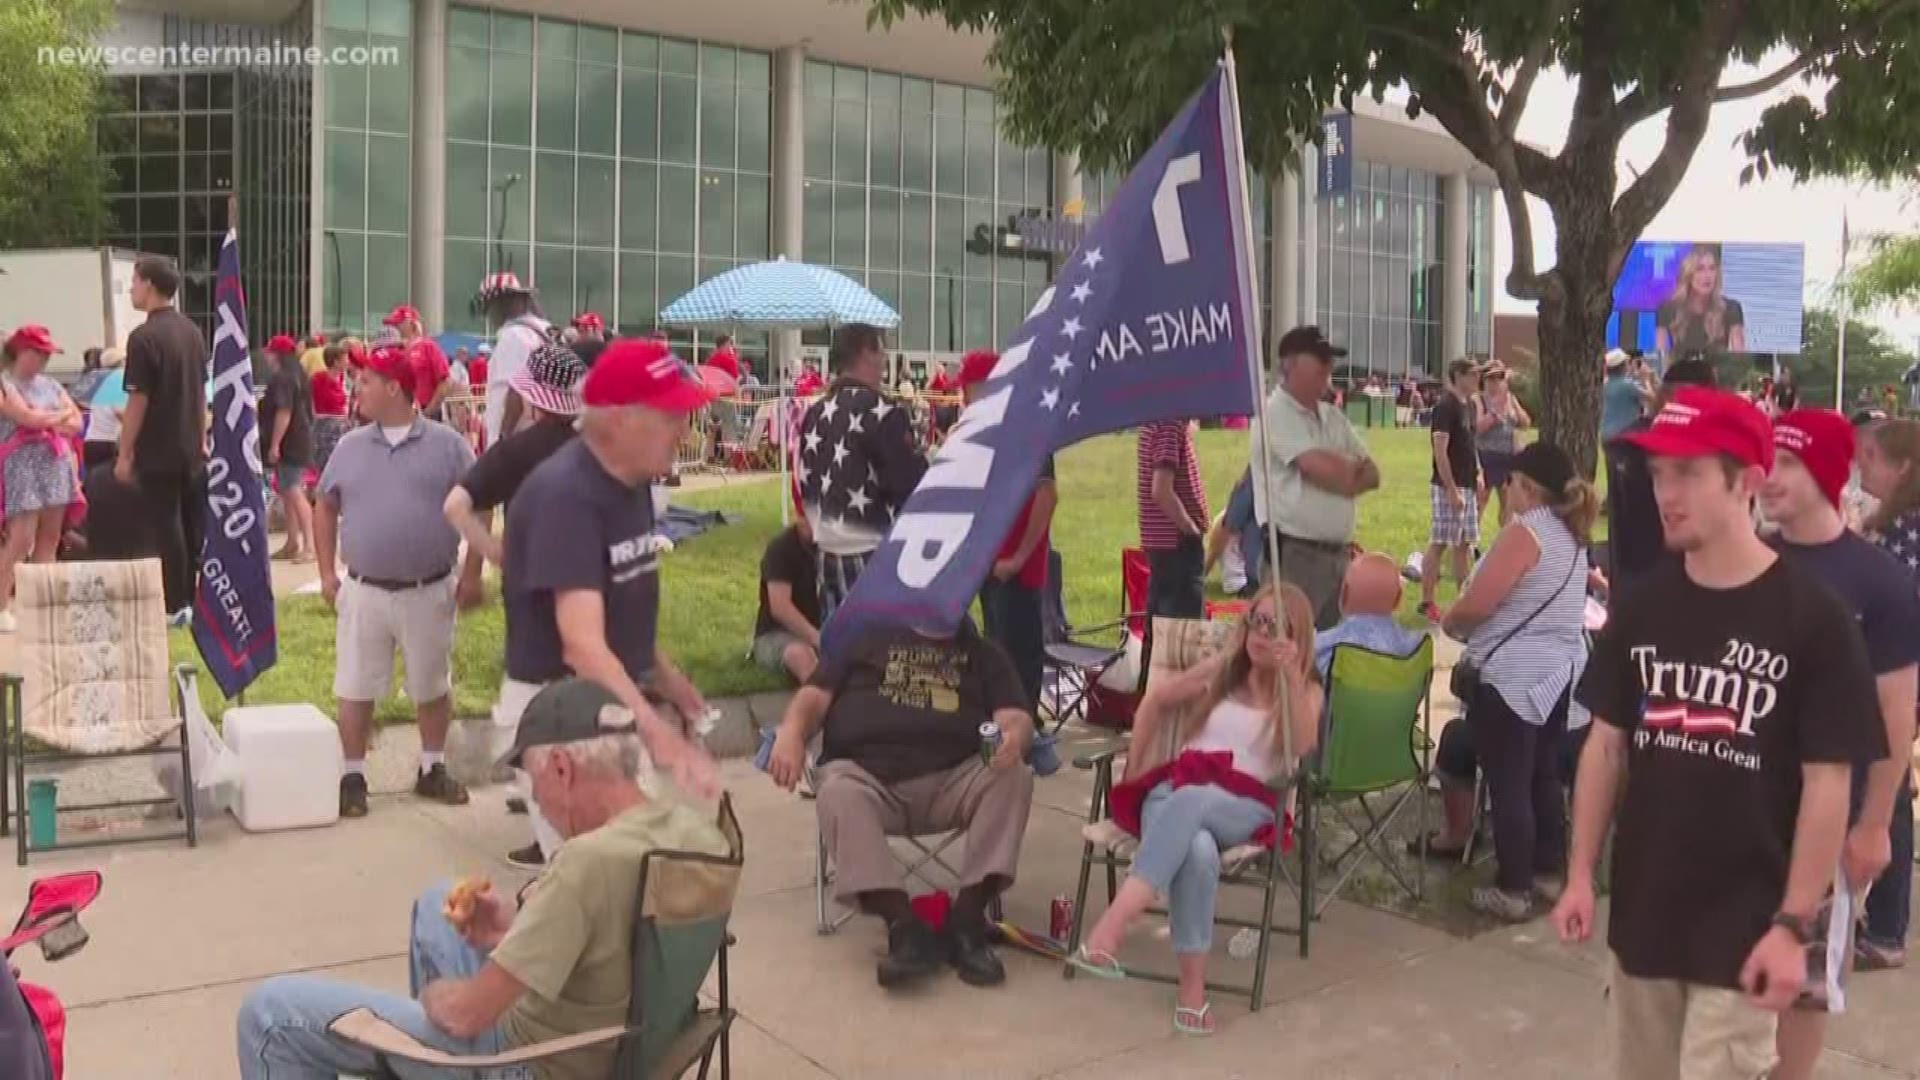 The event in Manchester on August 15 is President Trump's first 2020 campaign rally in the state since announcing he is running for reelection.